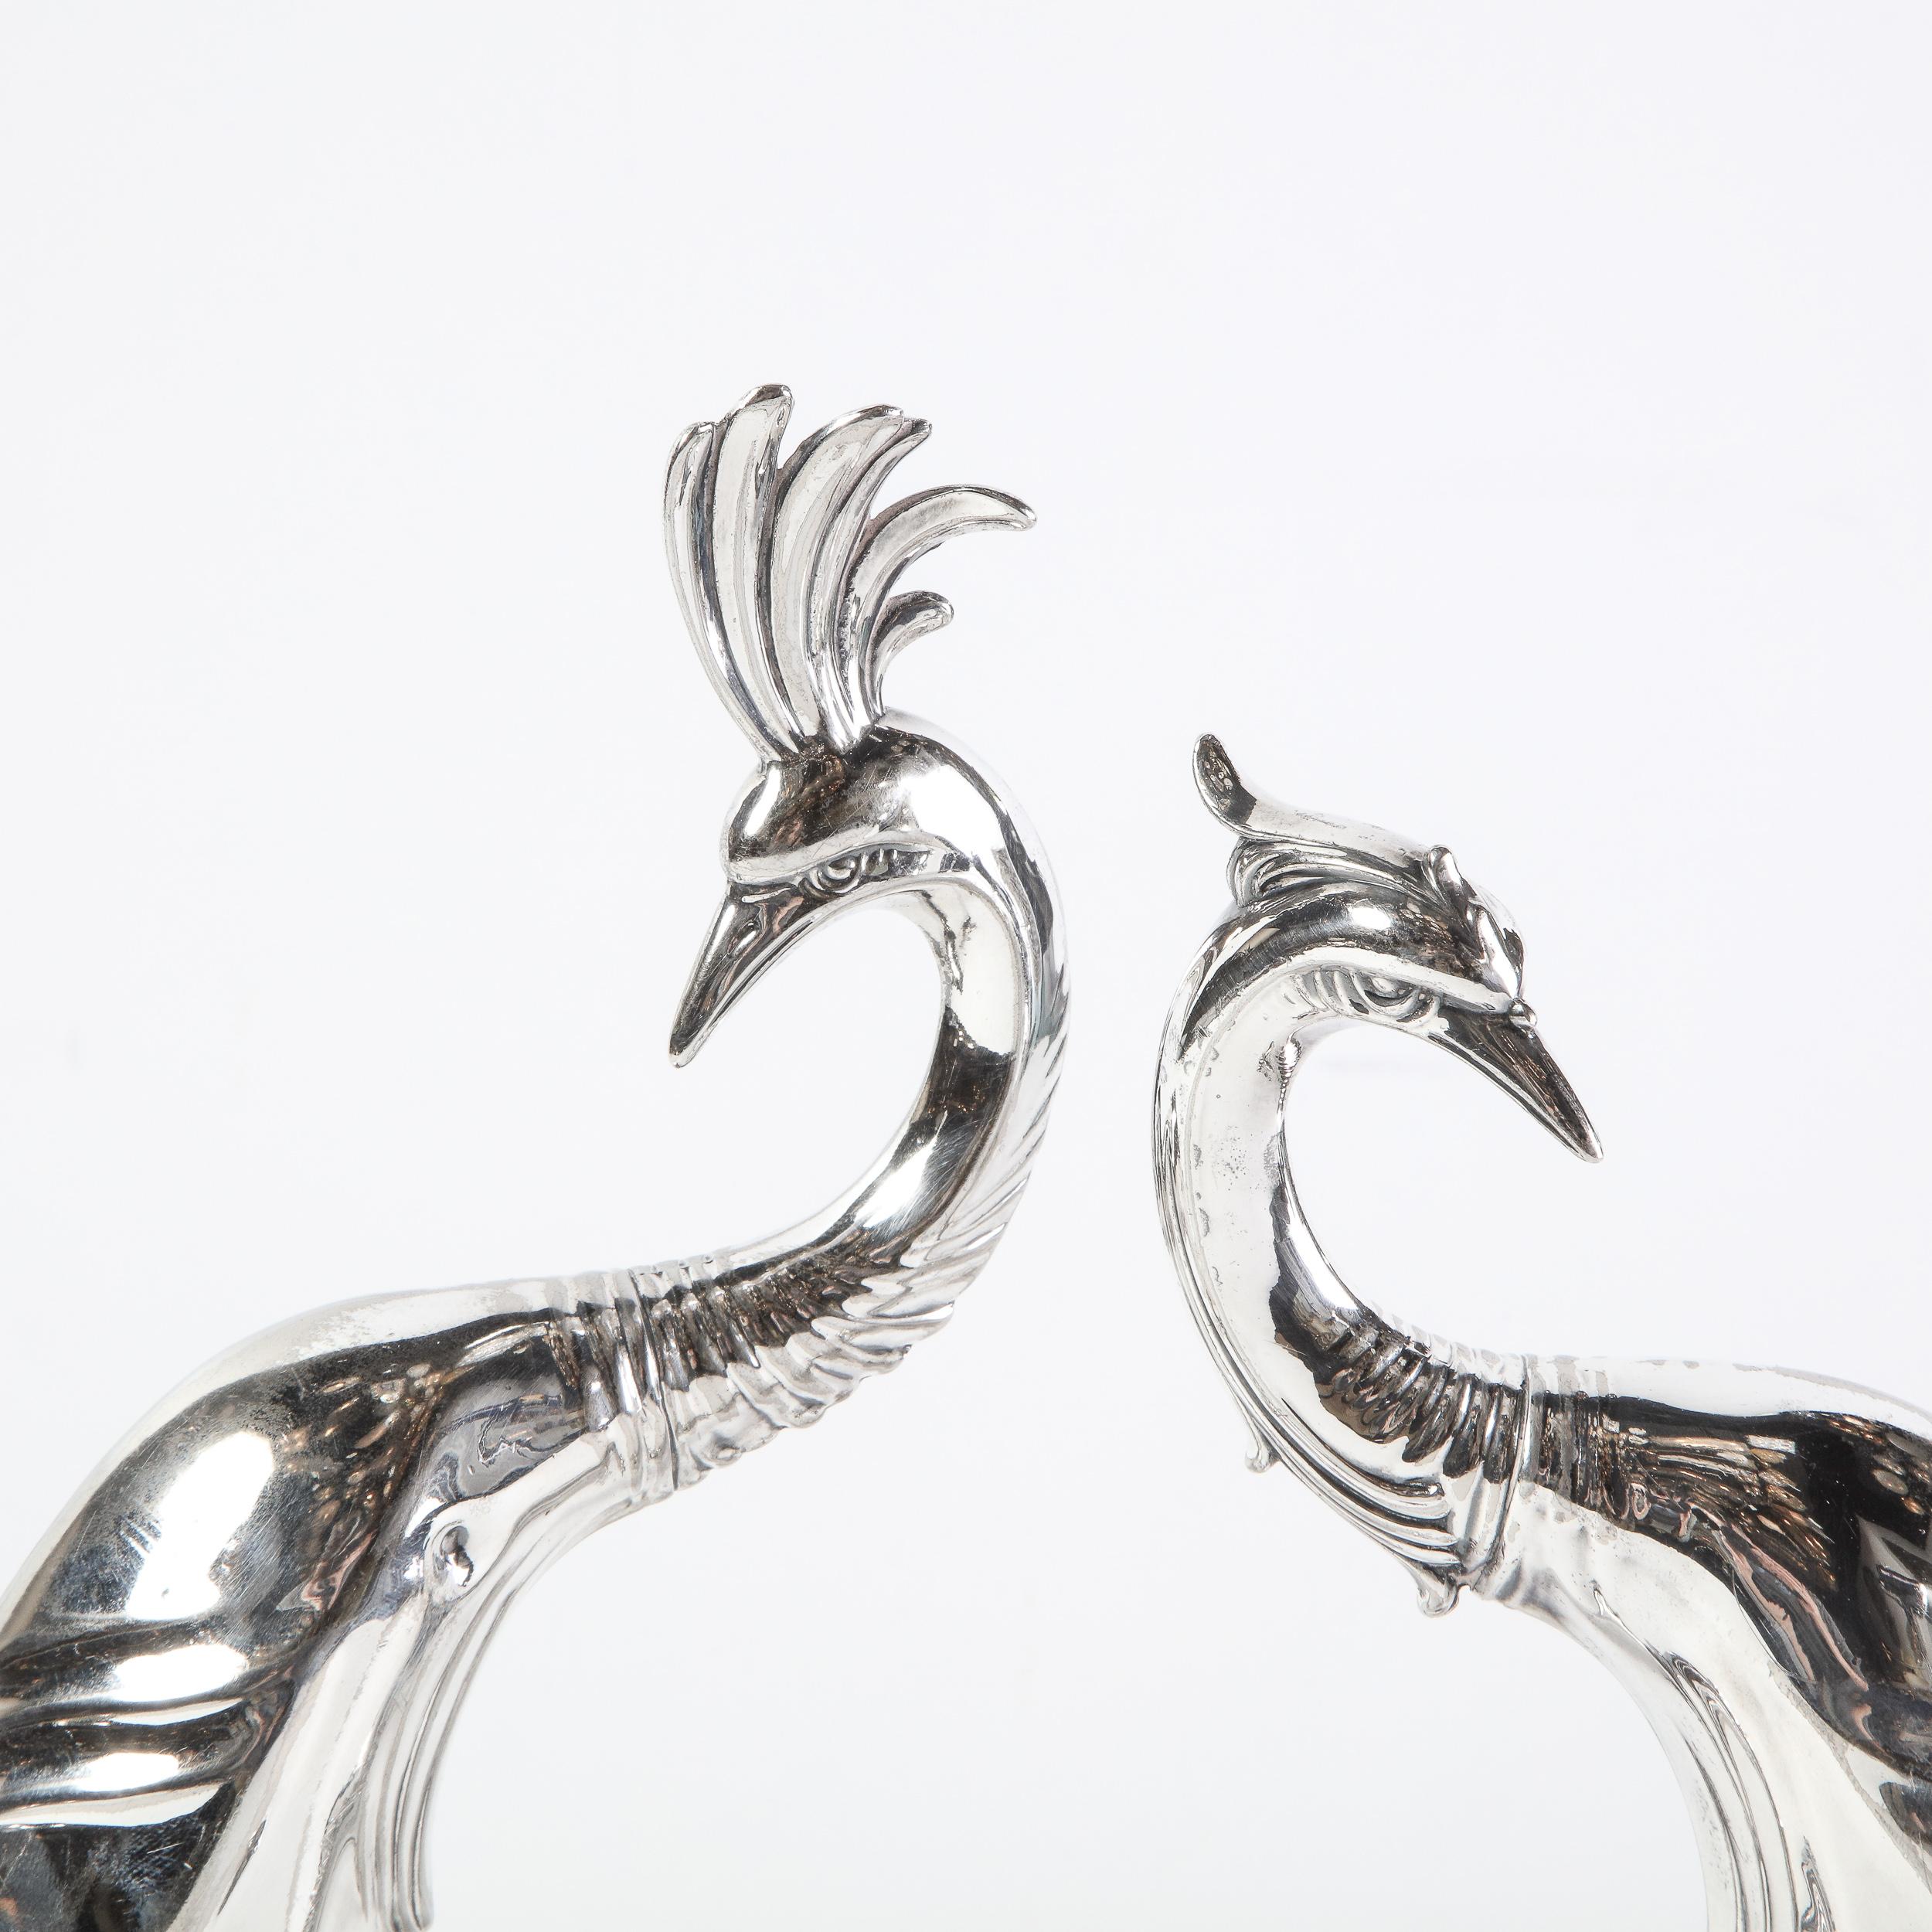 Pair of 1930s Art Deco Silverplated Stylized Peacock Sculptures by Weidlich Bros 6